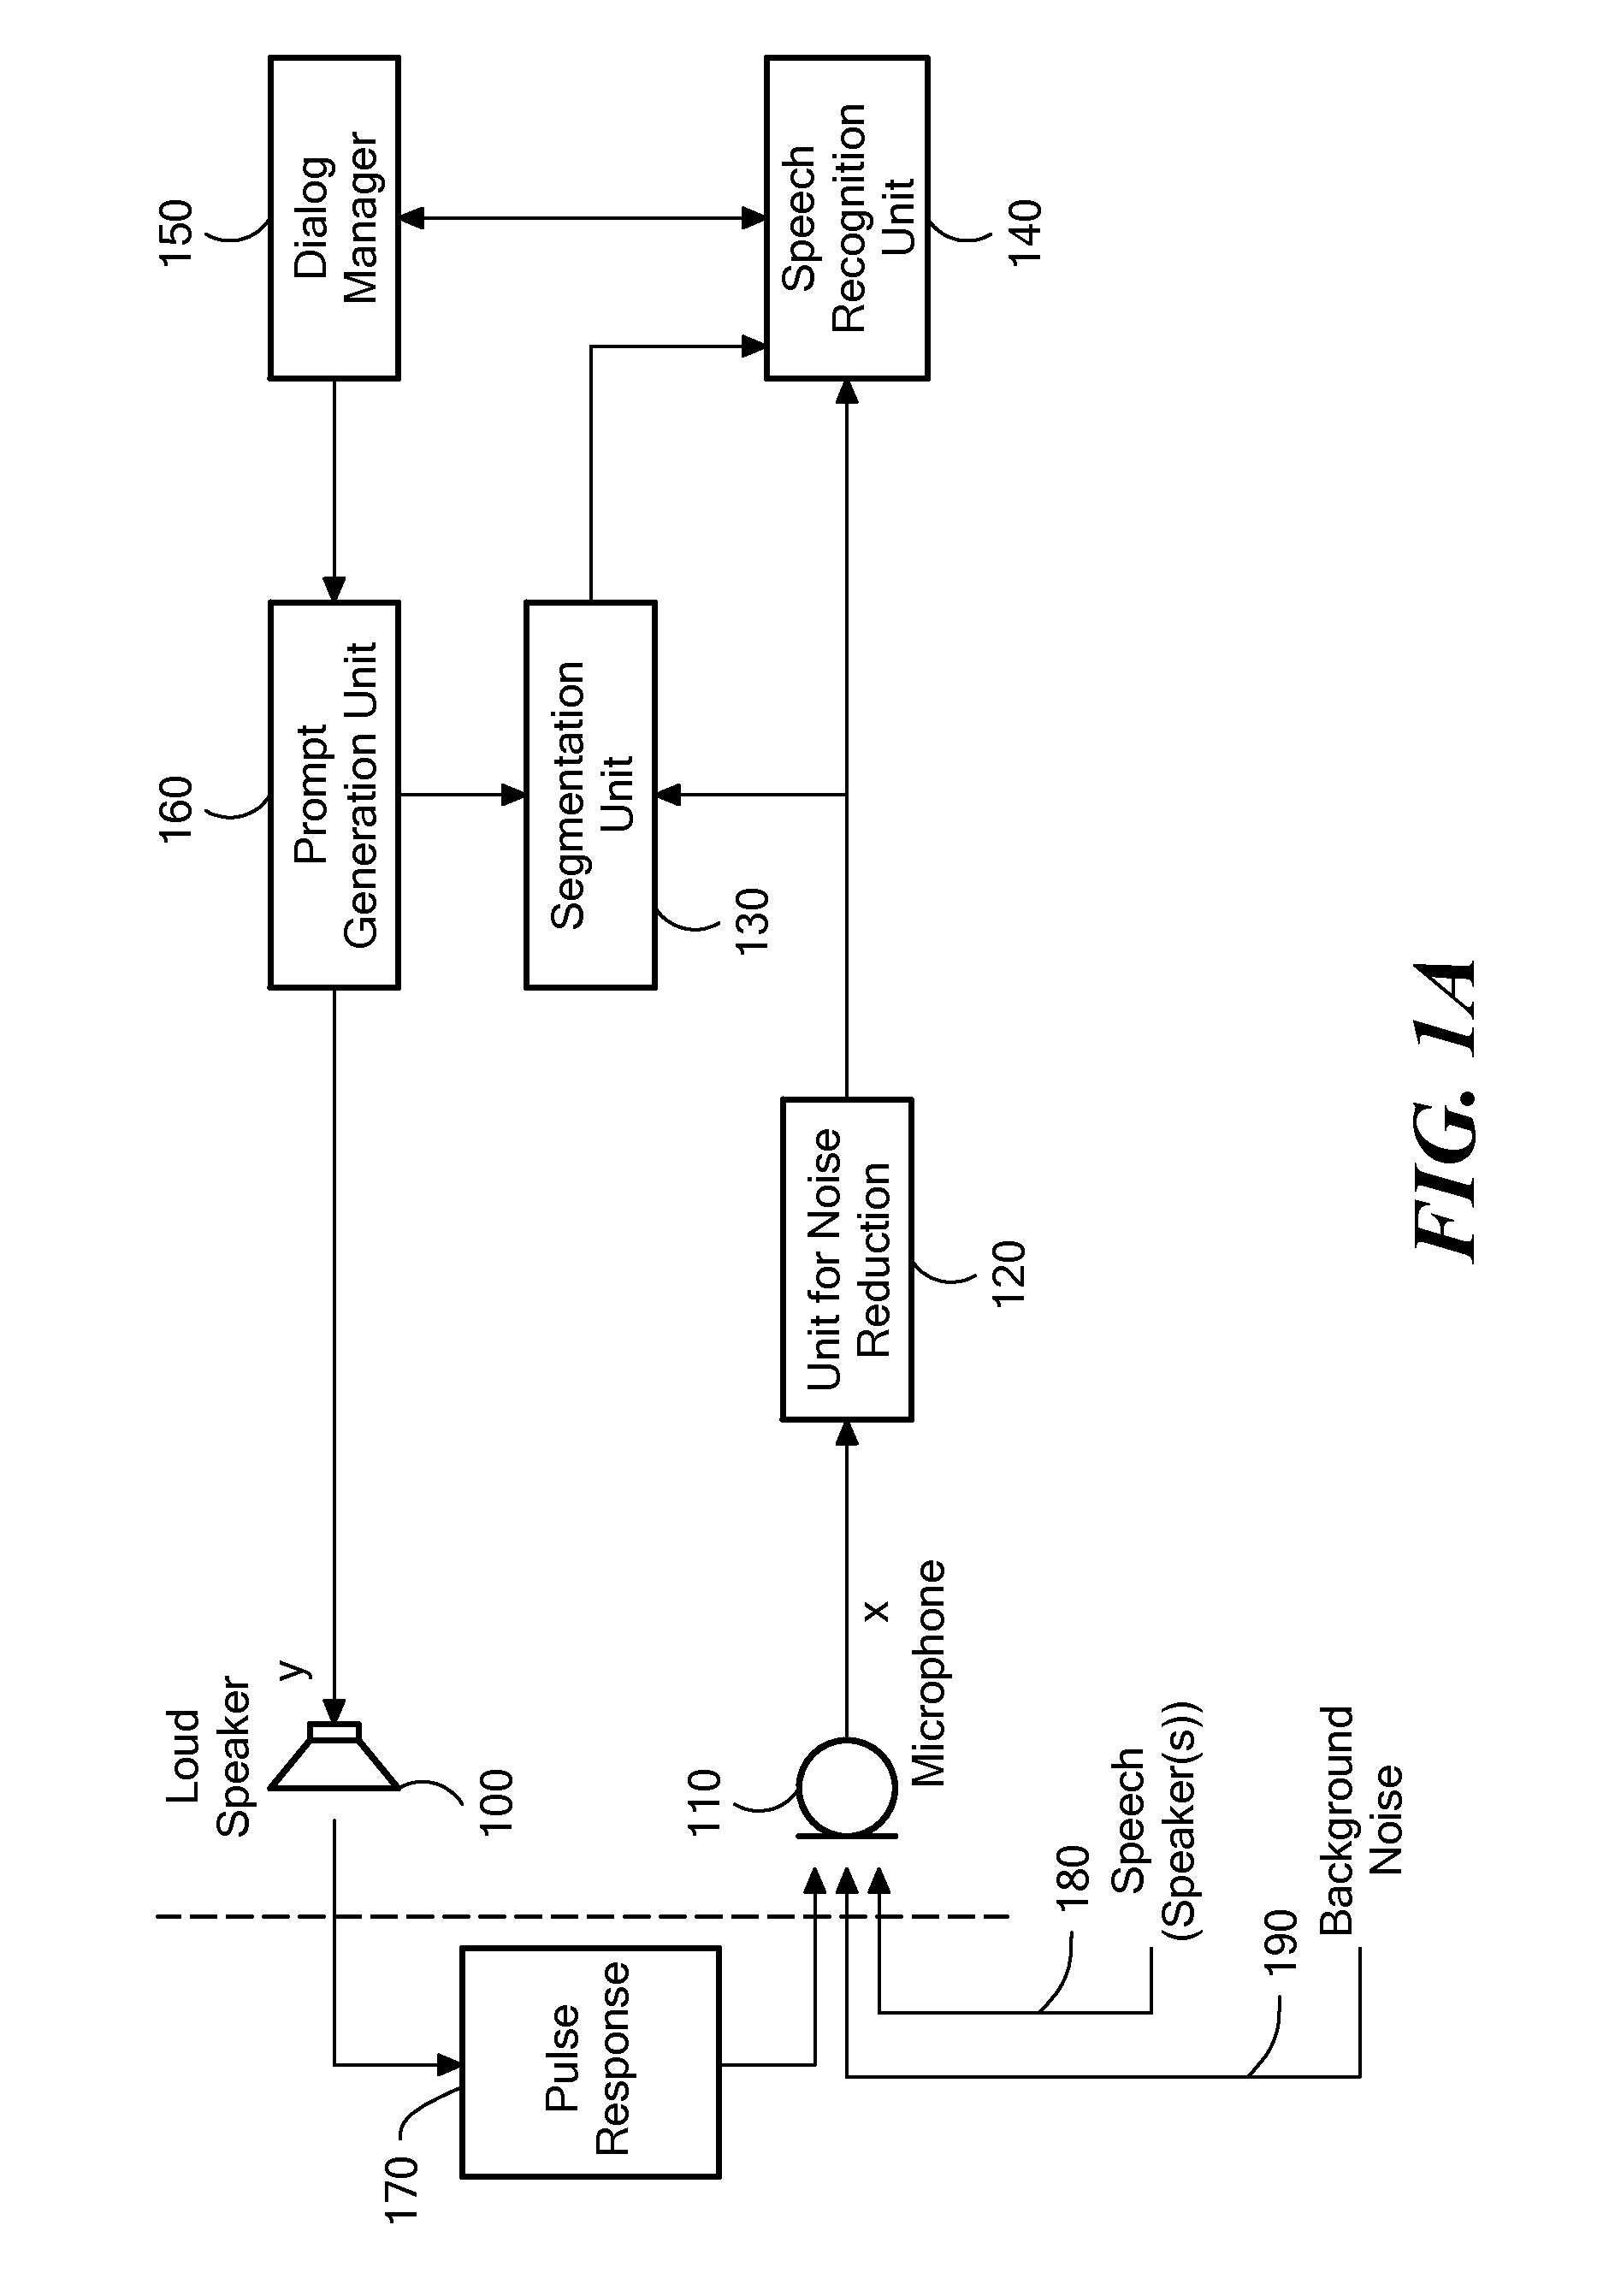 Method for Determining the Presence of a Wanted Signal Component